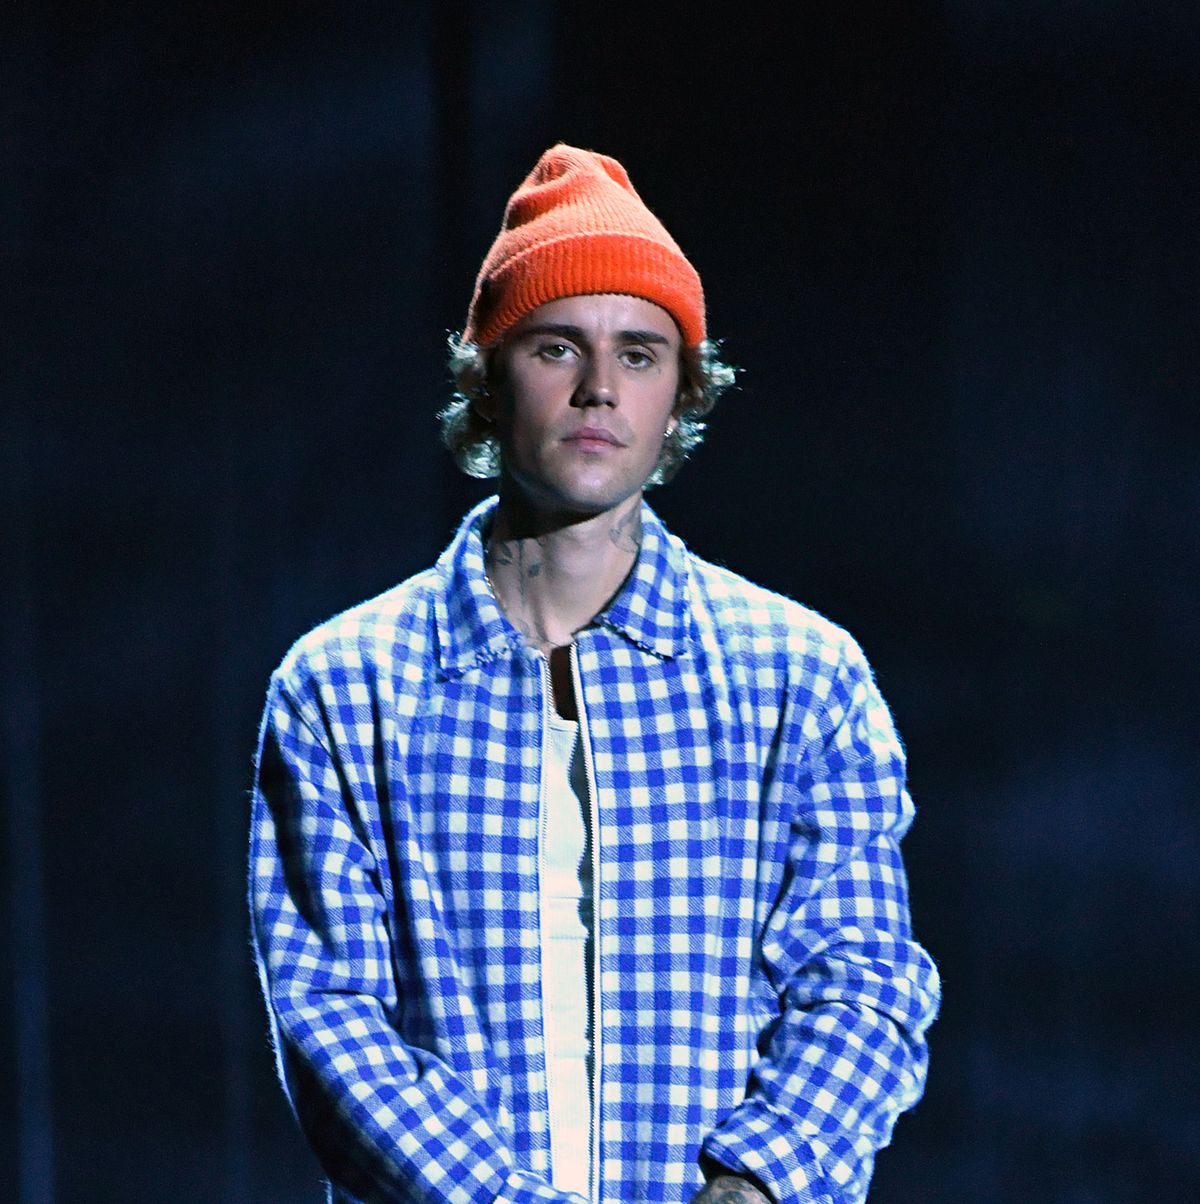 Justin Bieber's 'Ghost' ﻿Lyrics Are About Losing a Loved One